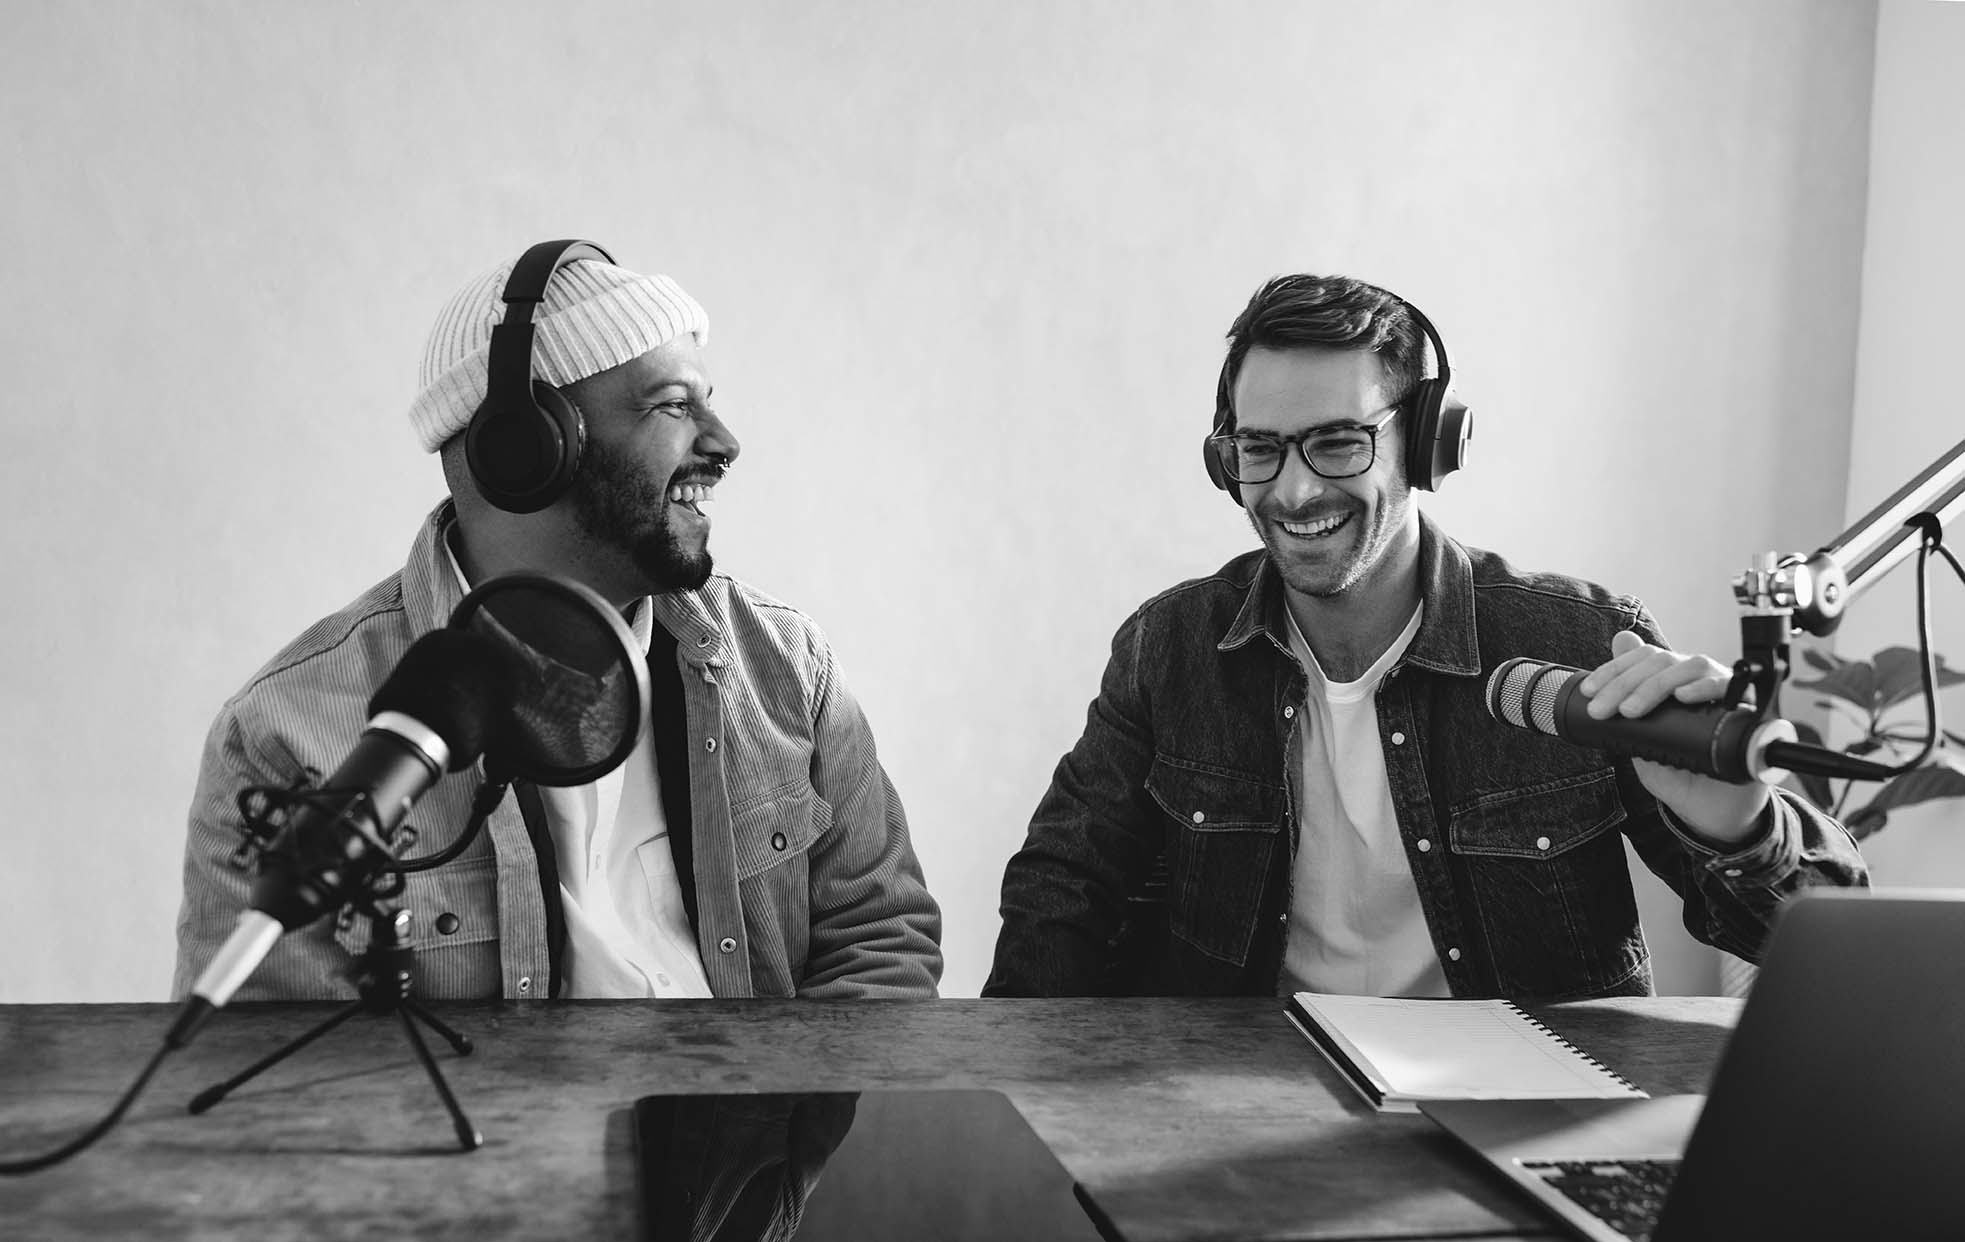 Two smiling men recording a podcast episode. Transcribing the episode for their web page will boost their podcast's search engine visibility.